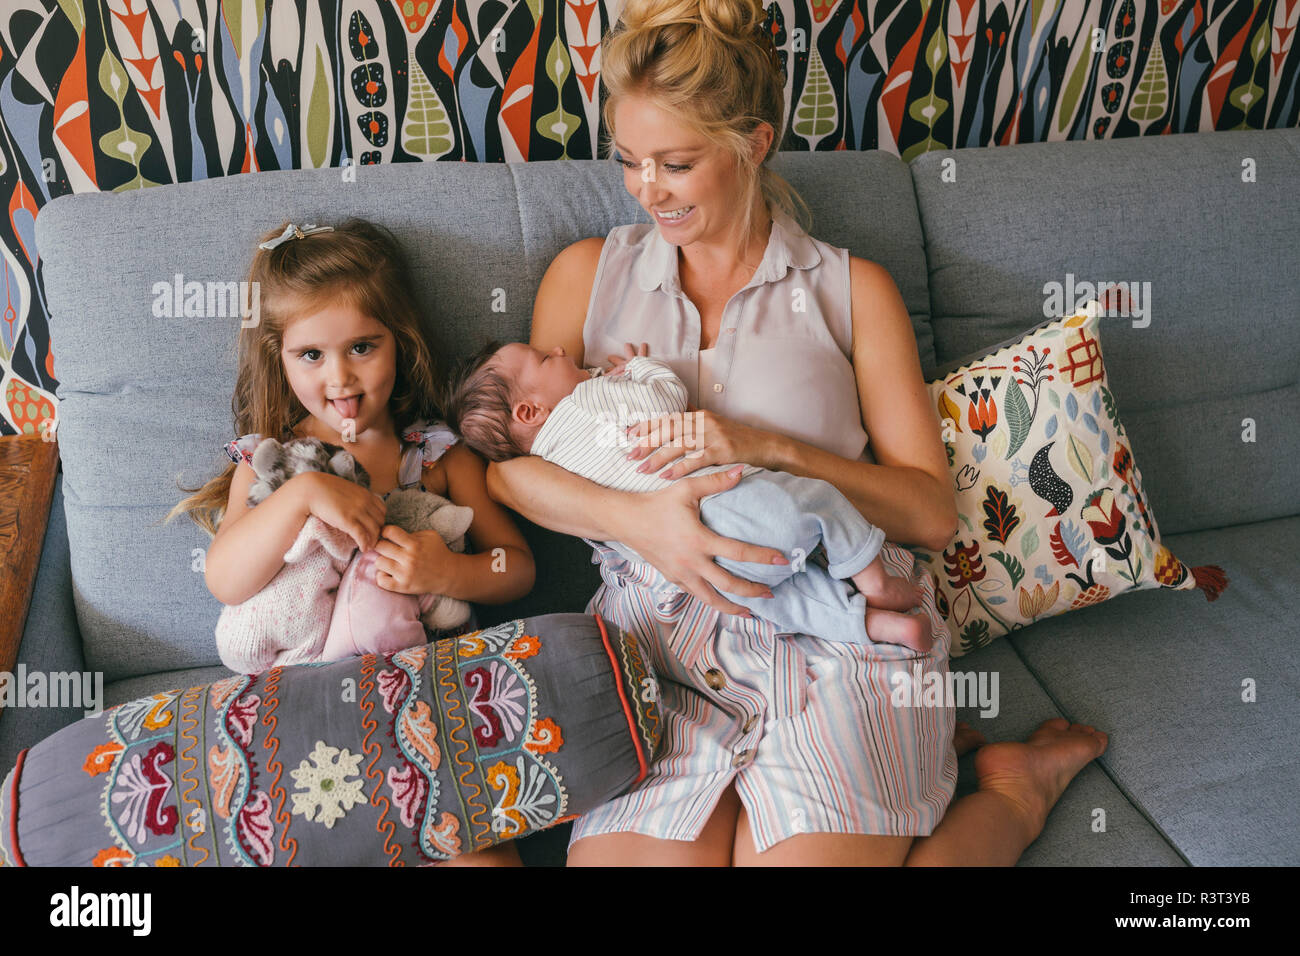 Smiling mother sitting on couch with newborn baby and daughter Stock Photo